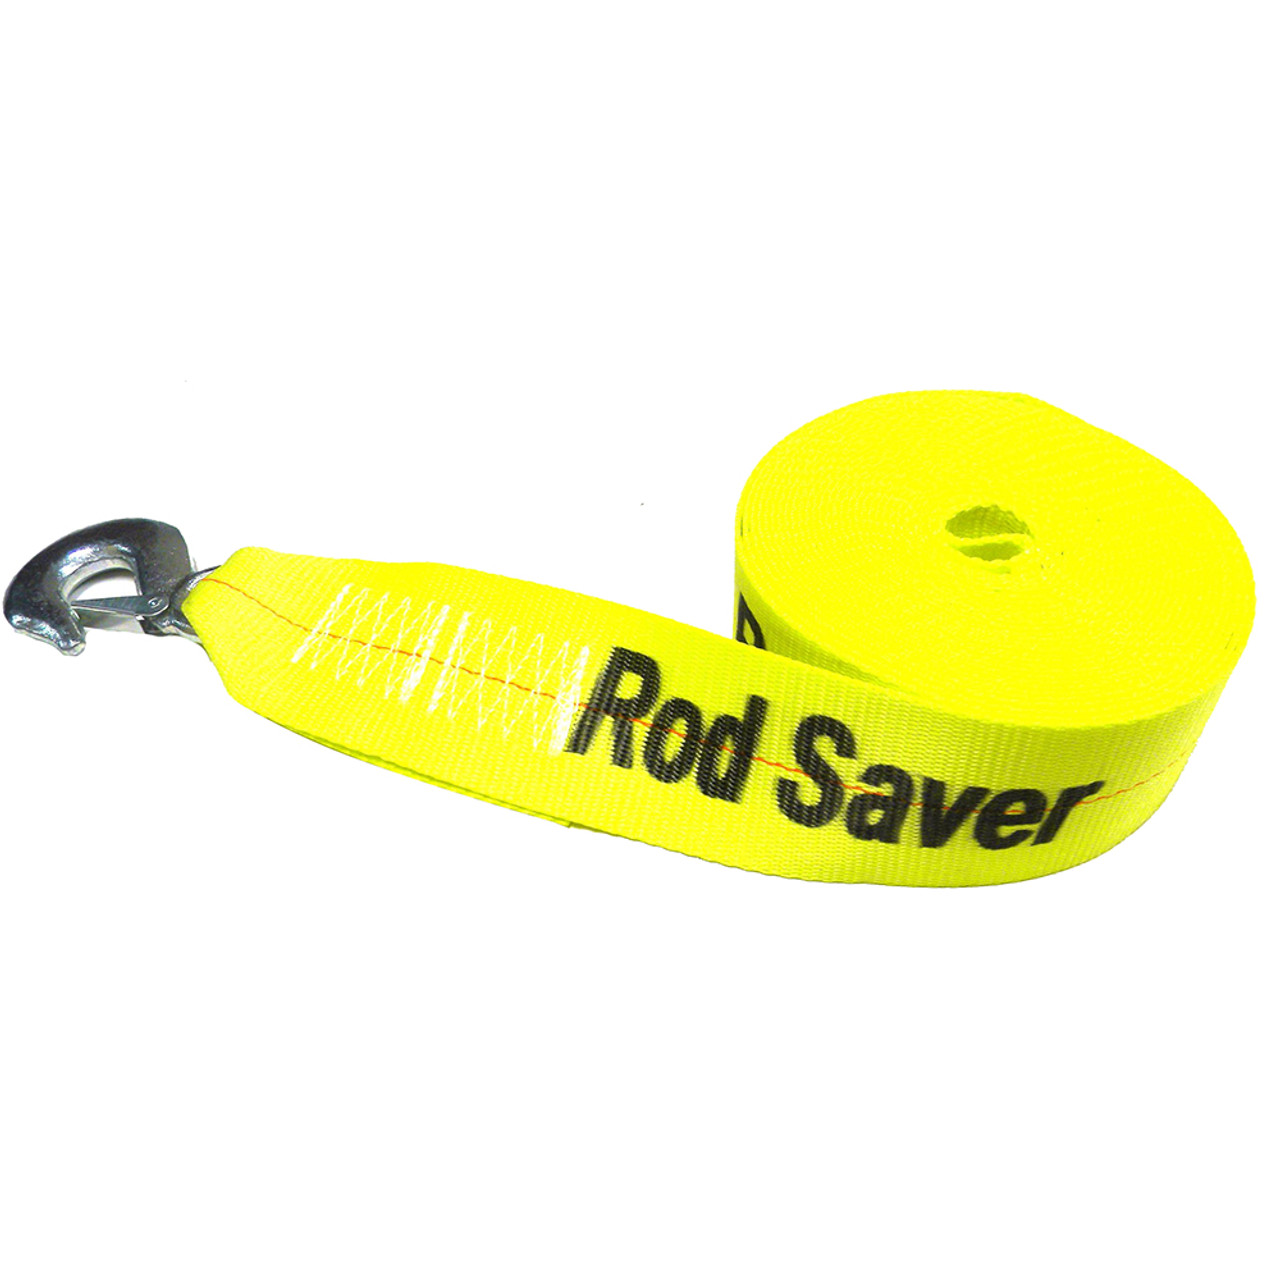 Rod Saver Heavy-Duty Winch Strap Replacement - Yellow - 3 x 25